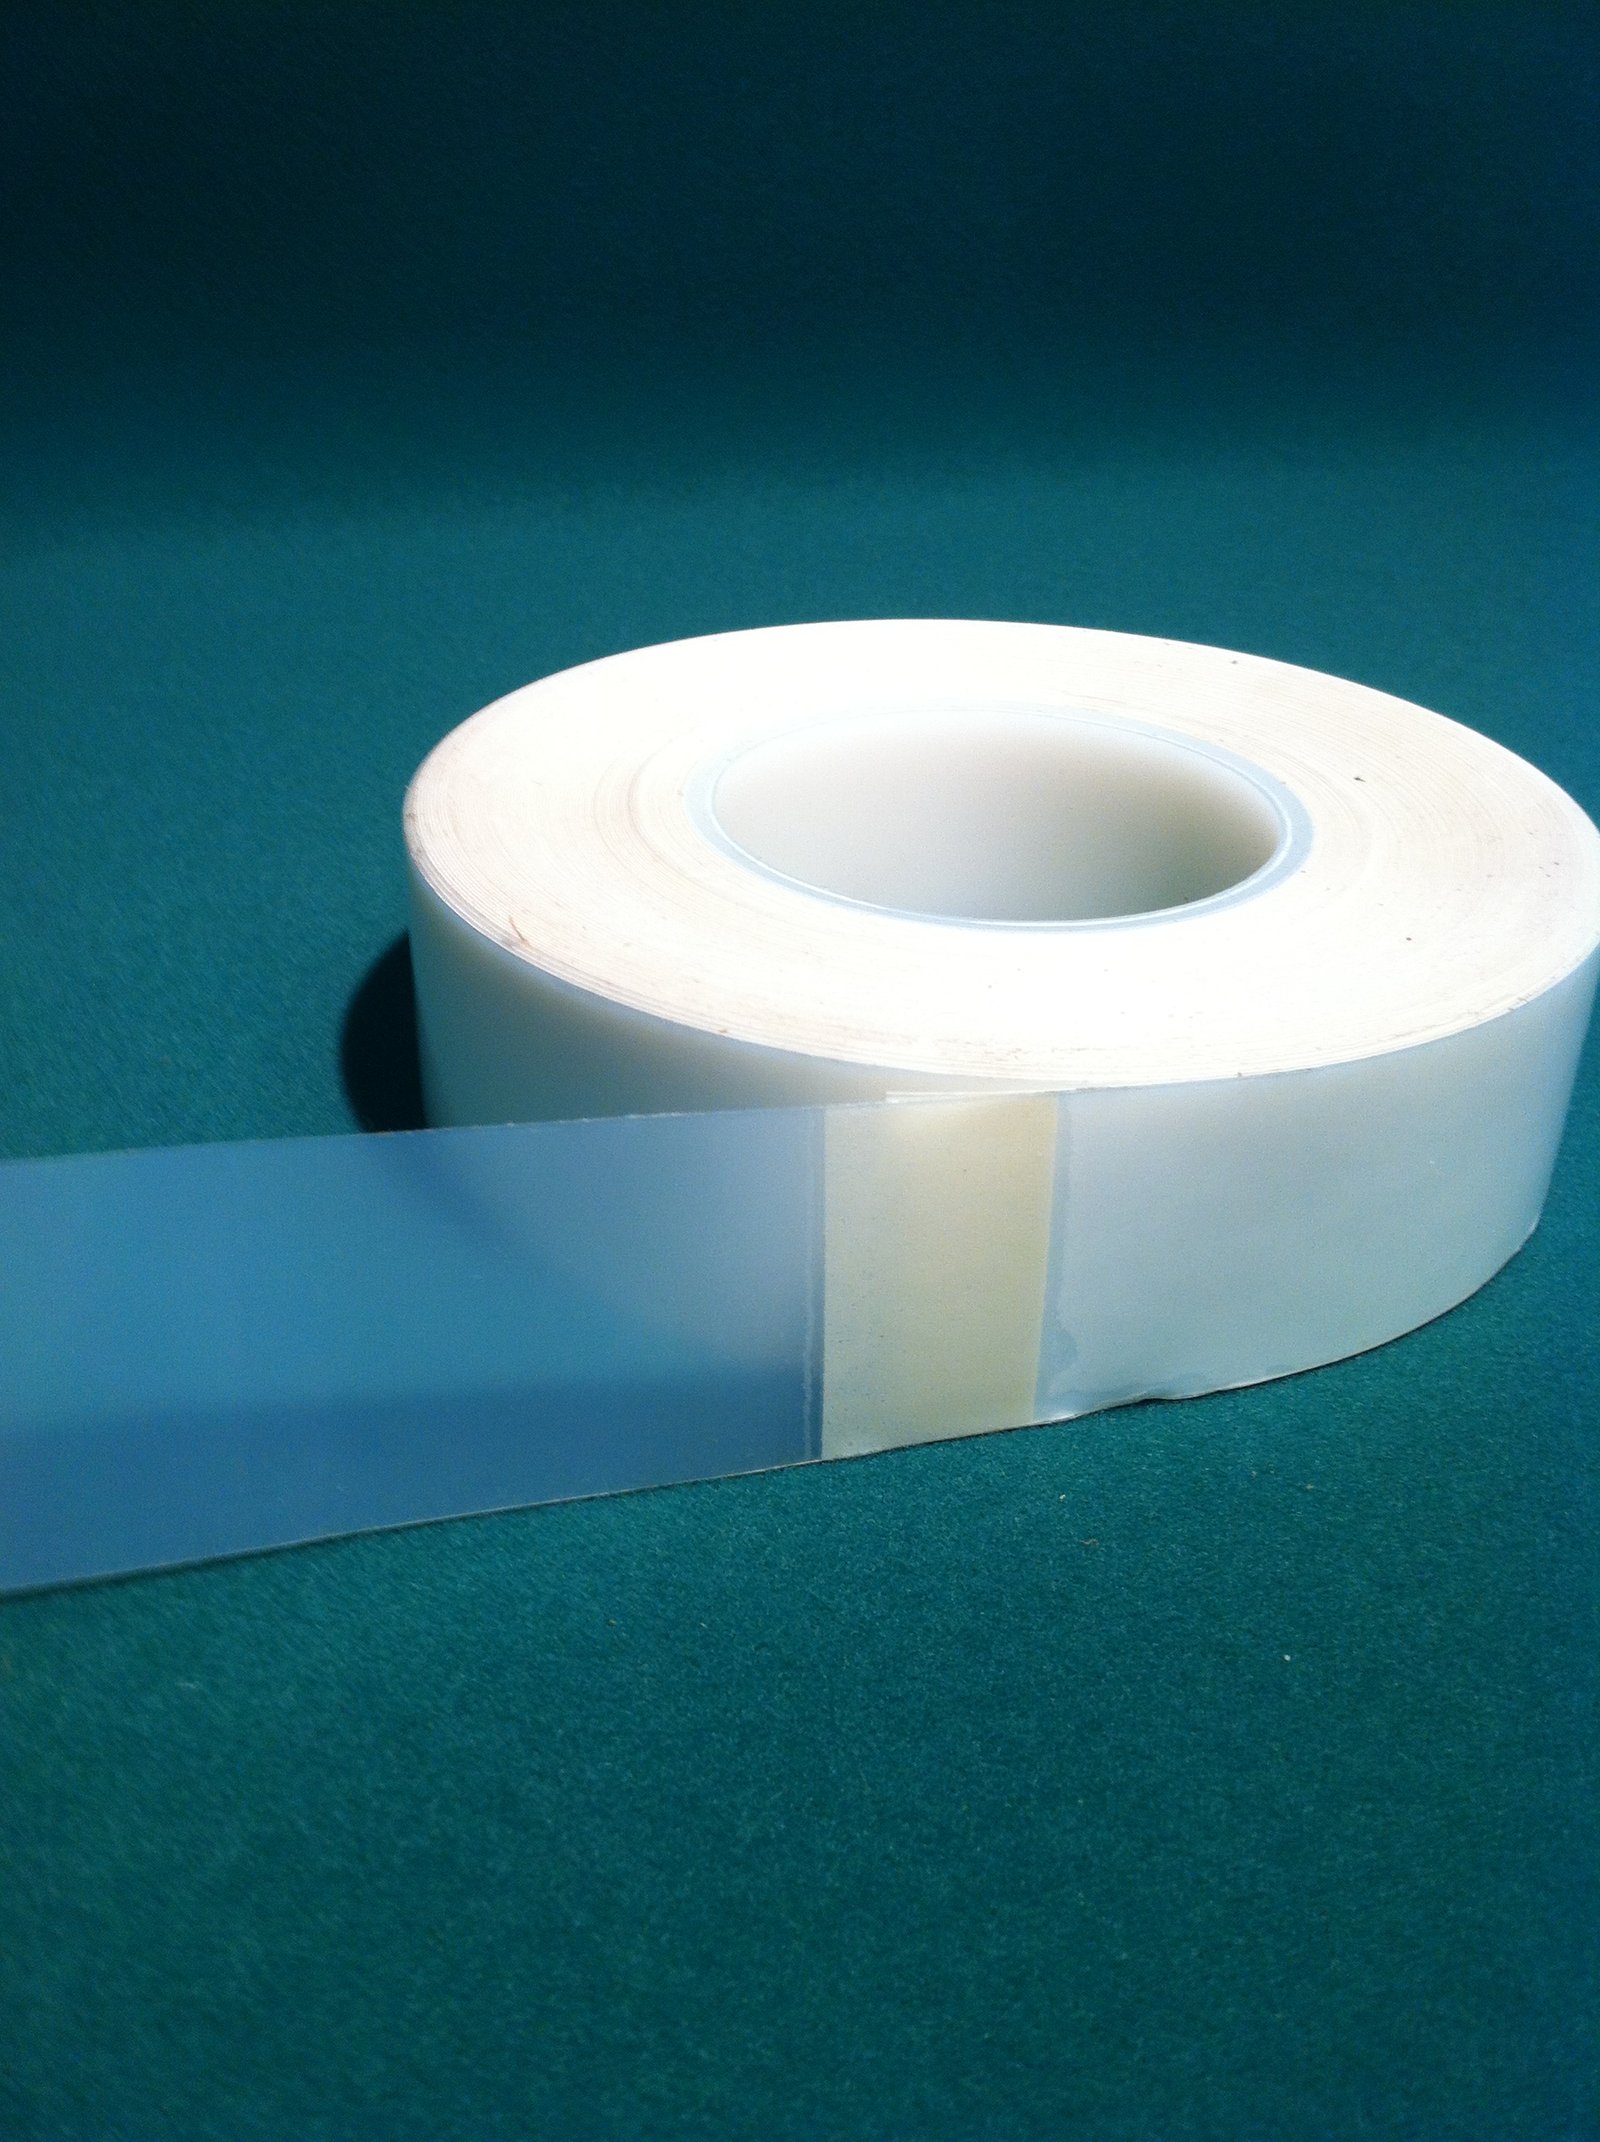 1-1/2″ wide PTFE Fabric Tape with 1/2″ non-sticky Zone down the